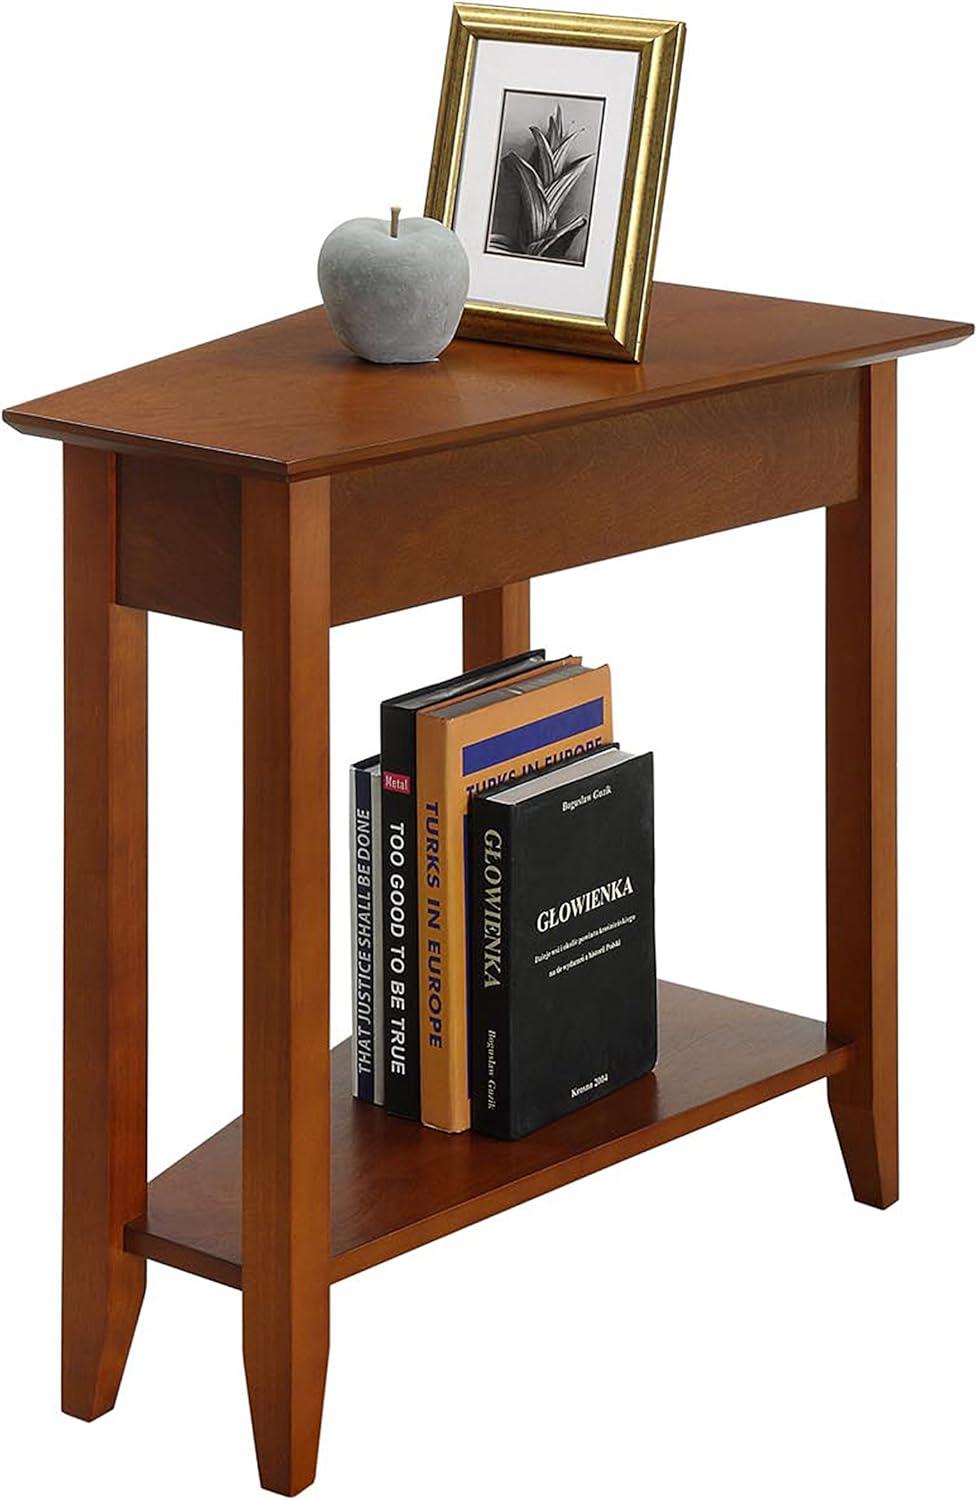 Triangular Cherry Wood and Metal Wedge End Table with Shelf